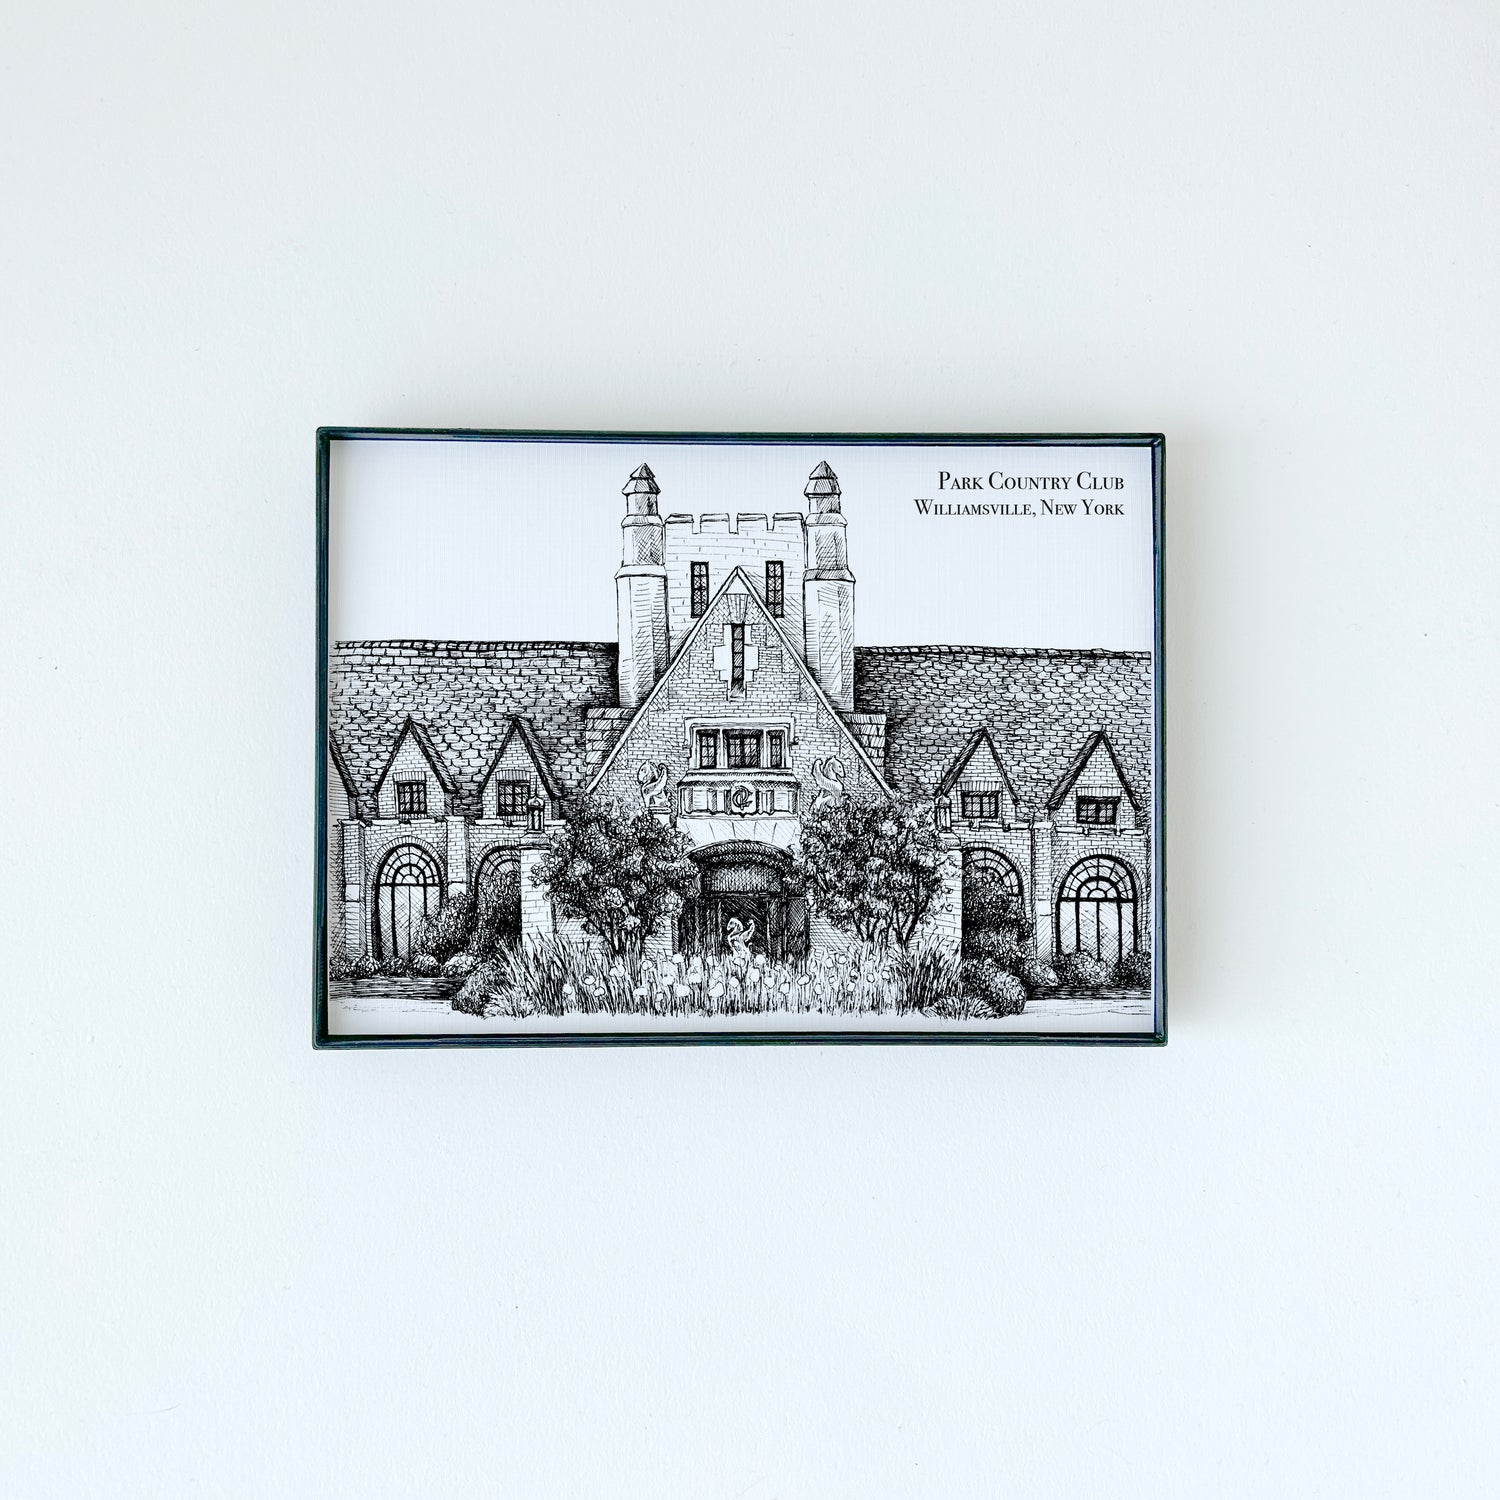 Park Country Club illustration in black ink on white paper by Rust Belt Love